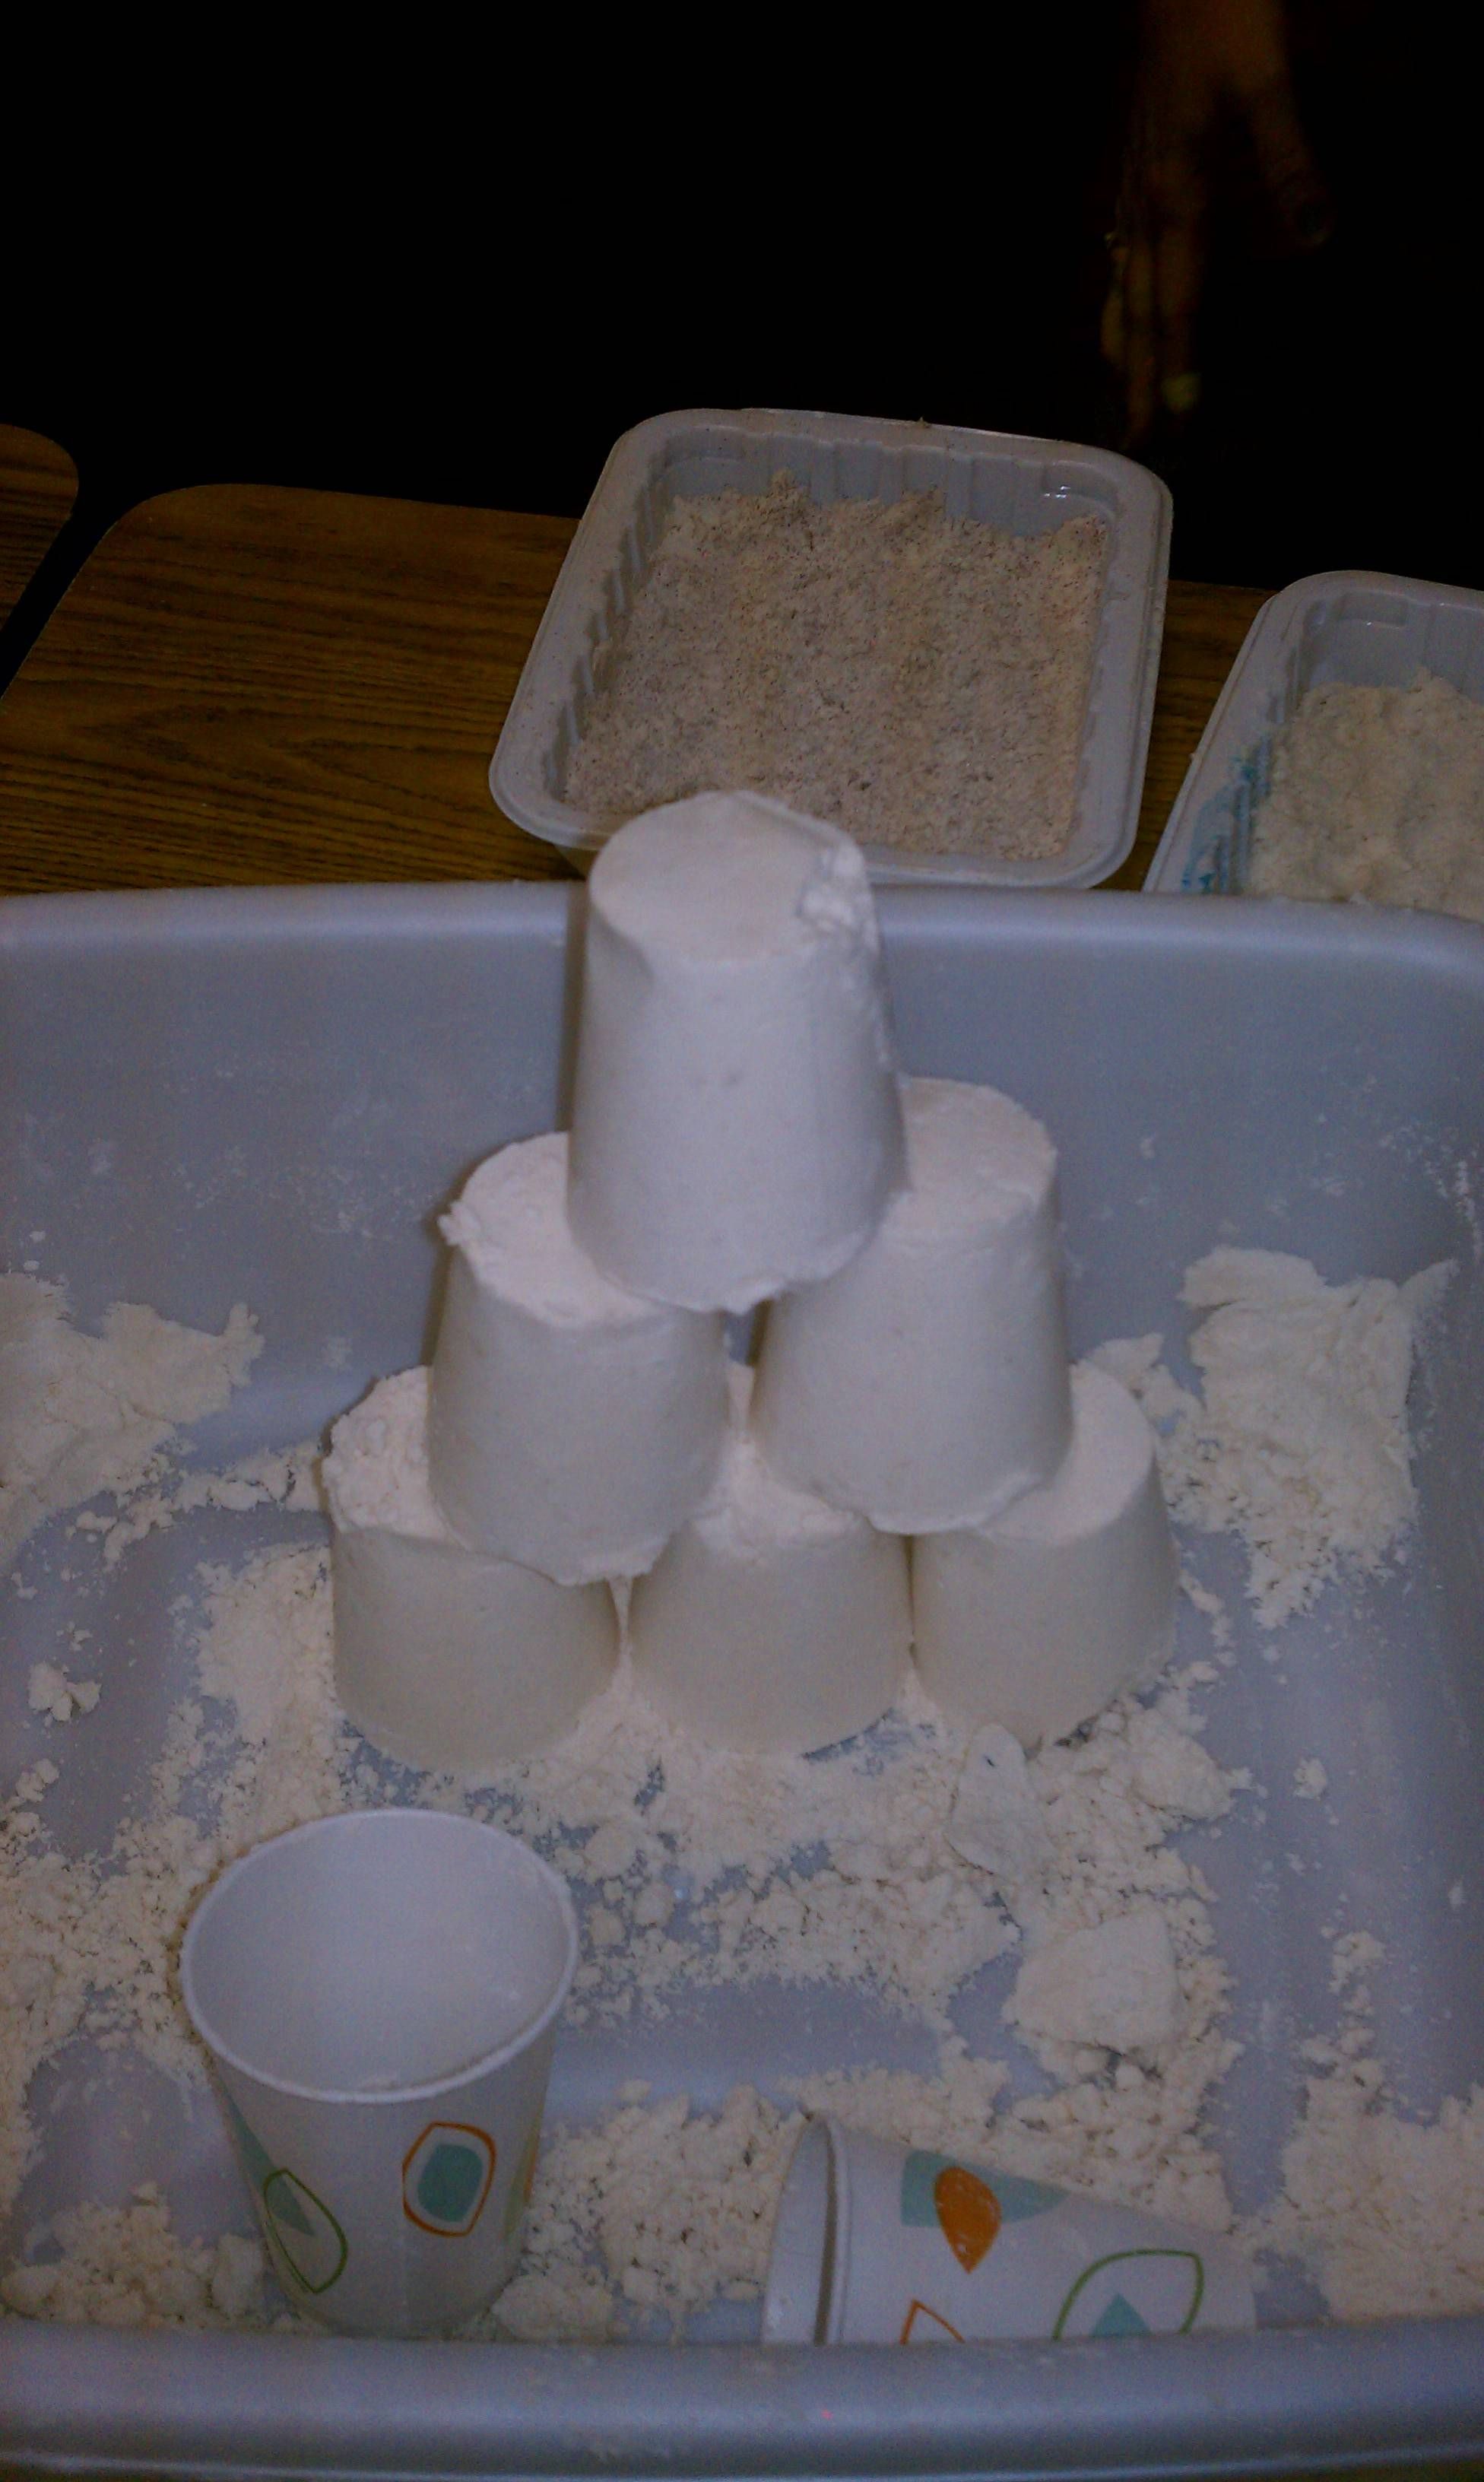 Your Kids will love playing with Moon sand. Just 8 cups of flour and 1 cup of ba